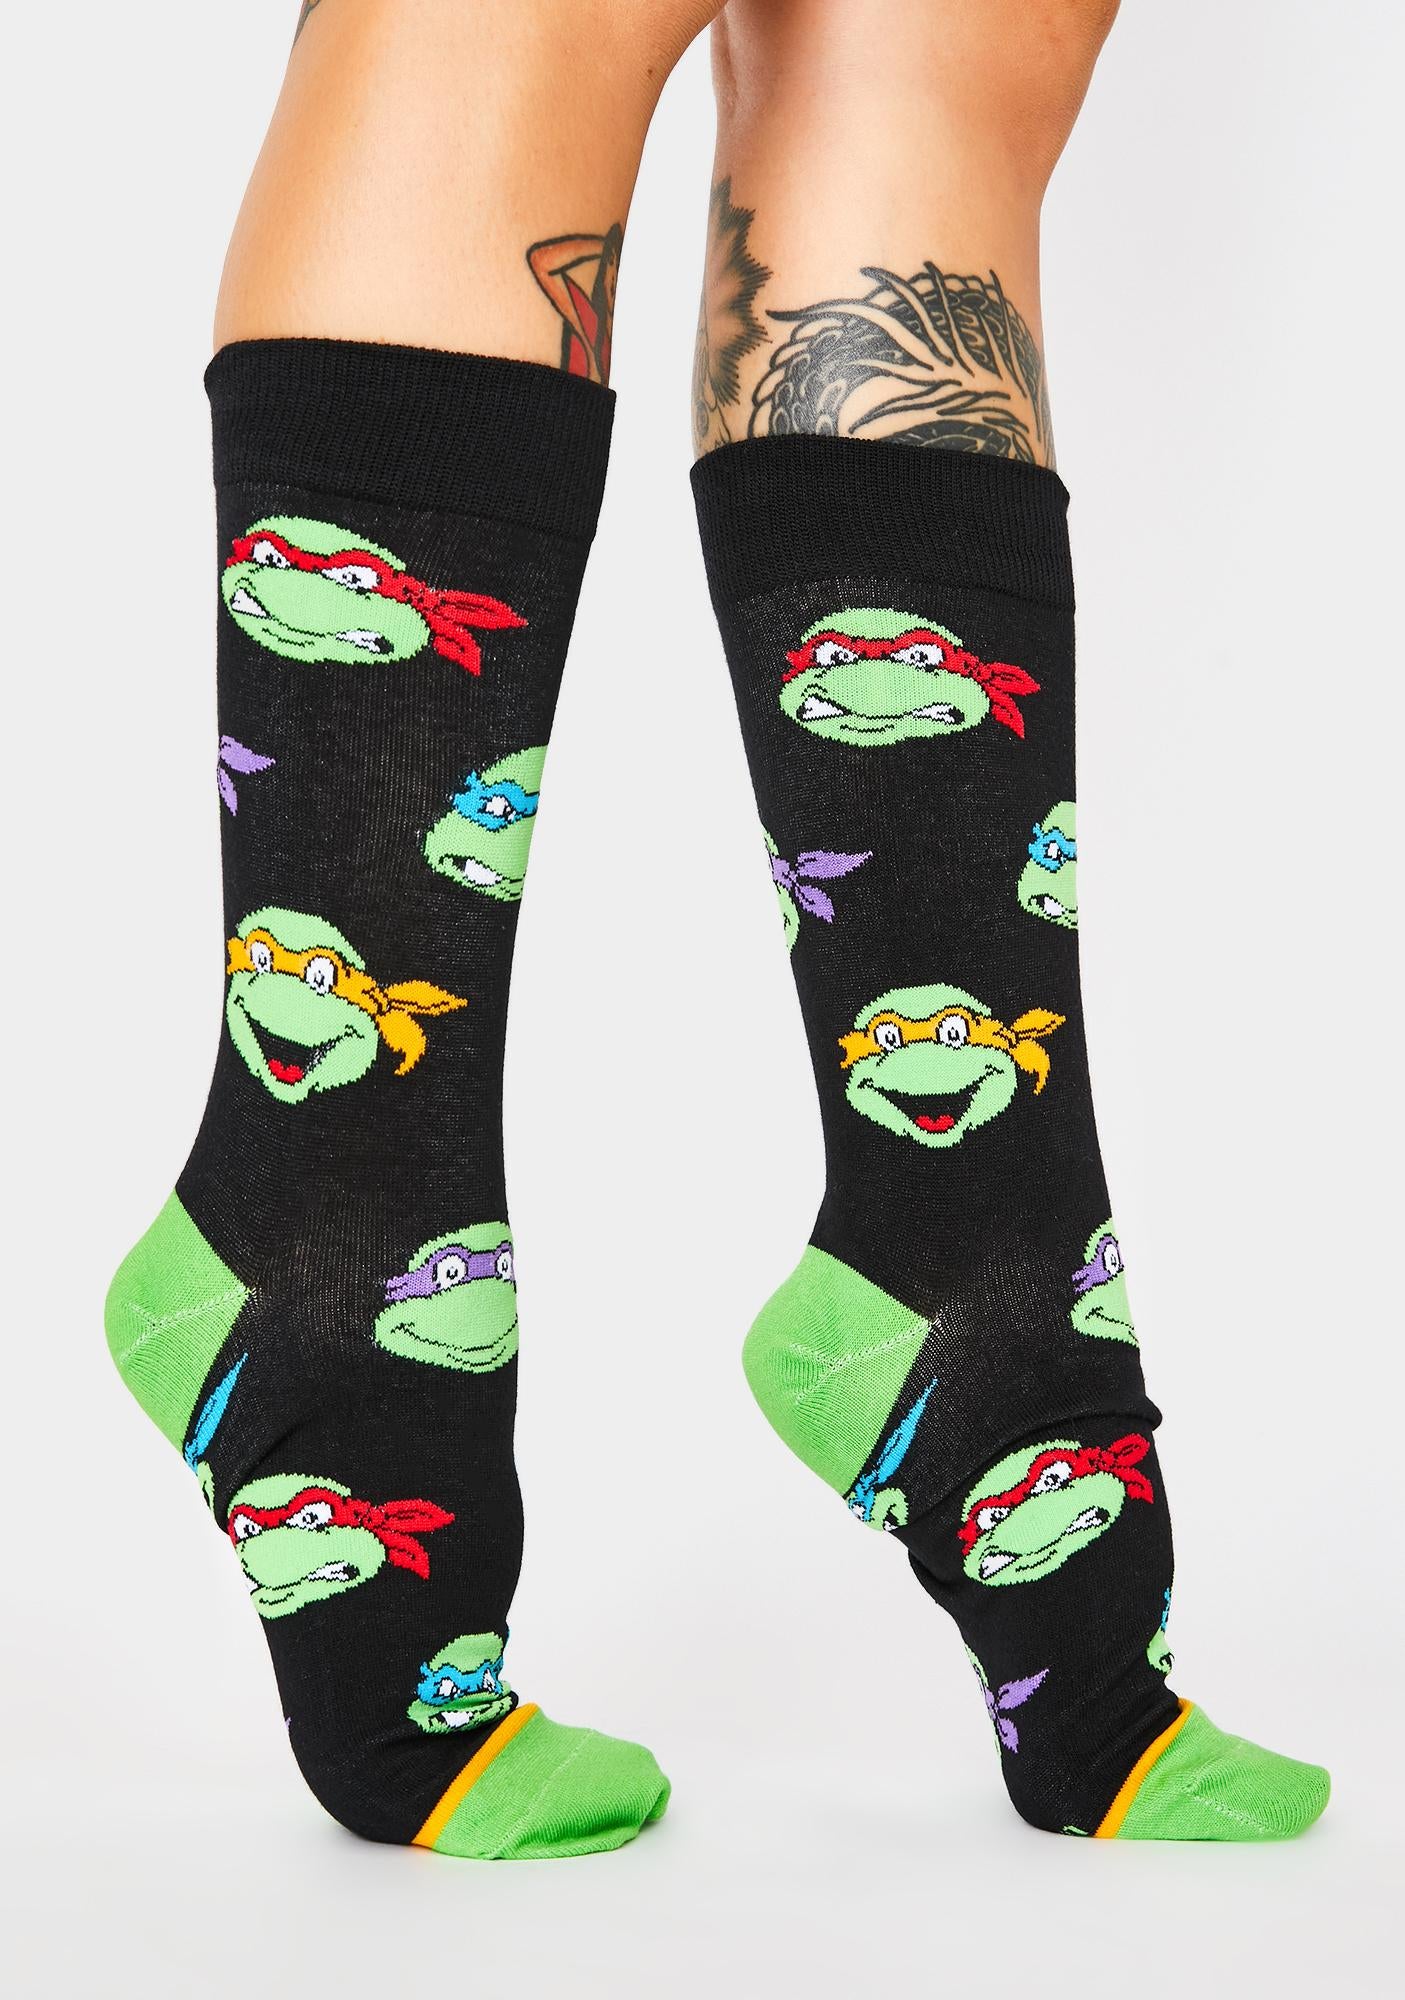 retro ninja turtles crew socks being worn by a person on a white background